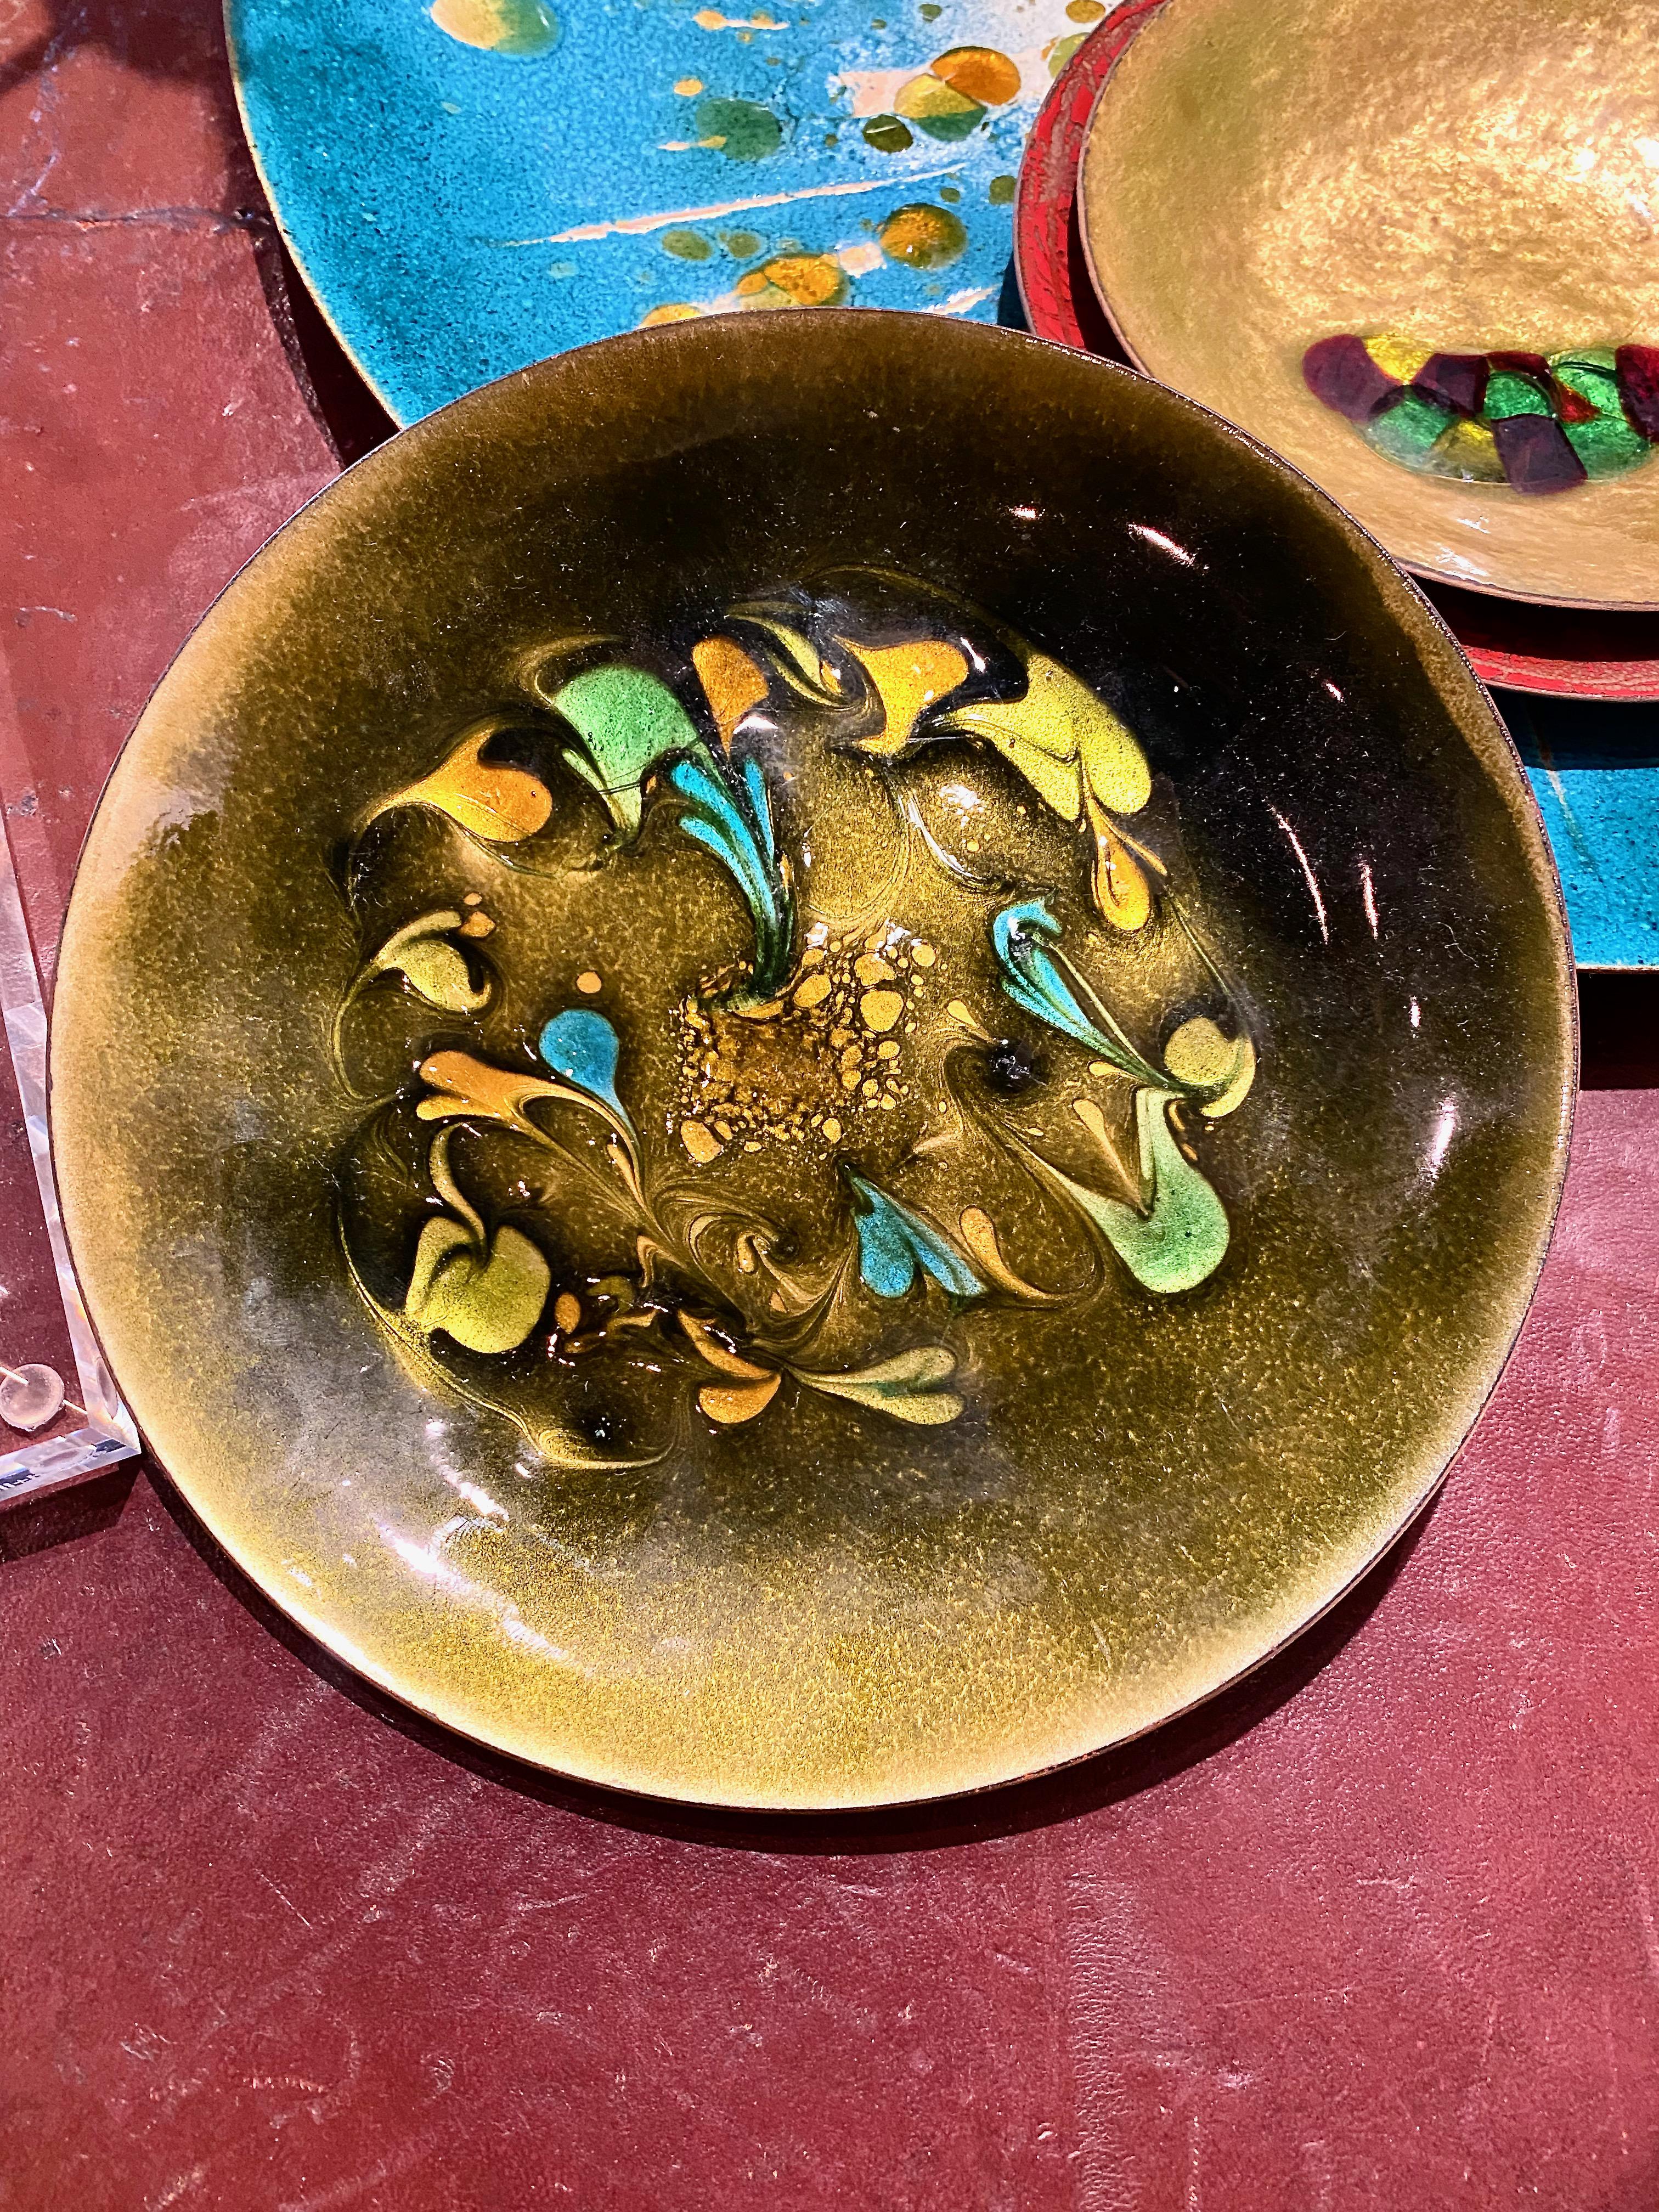 This is a good mid-century example of an enamel-on-copper vide-poche or catchall. The earth tones are reflective of the late 1960-1970s aesthetic. The dish is highlighted by frolicking abstract fish, birds and butterflies in green, turquoise, yellow